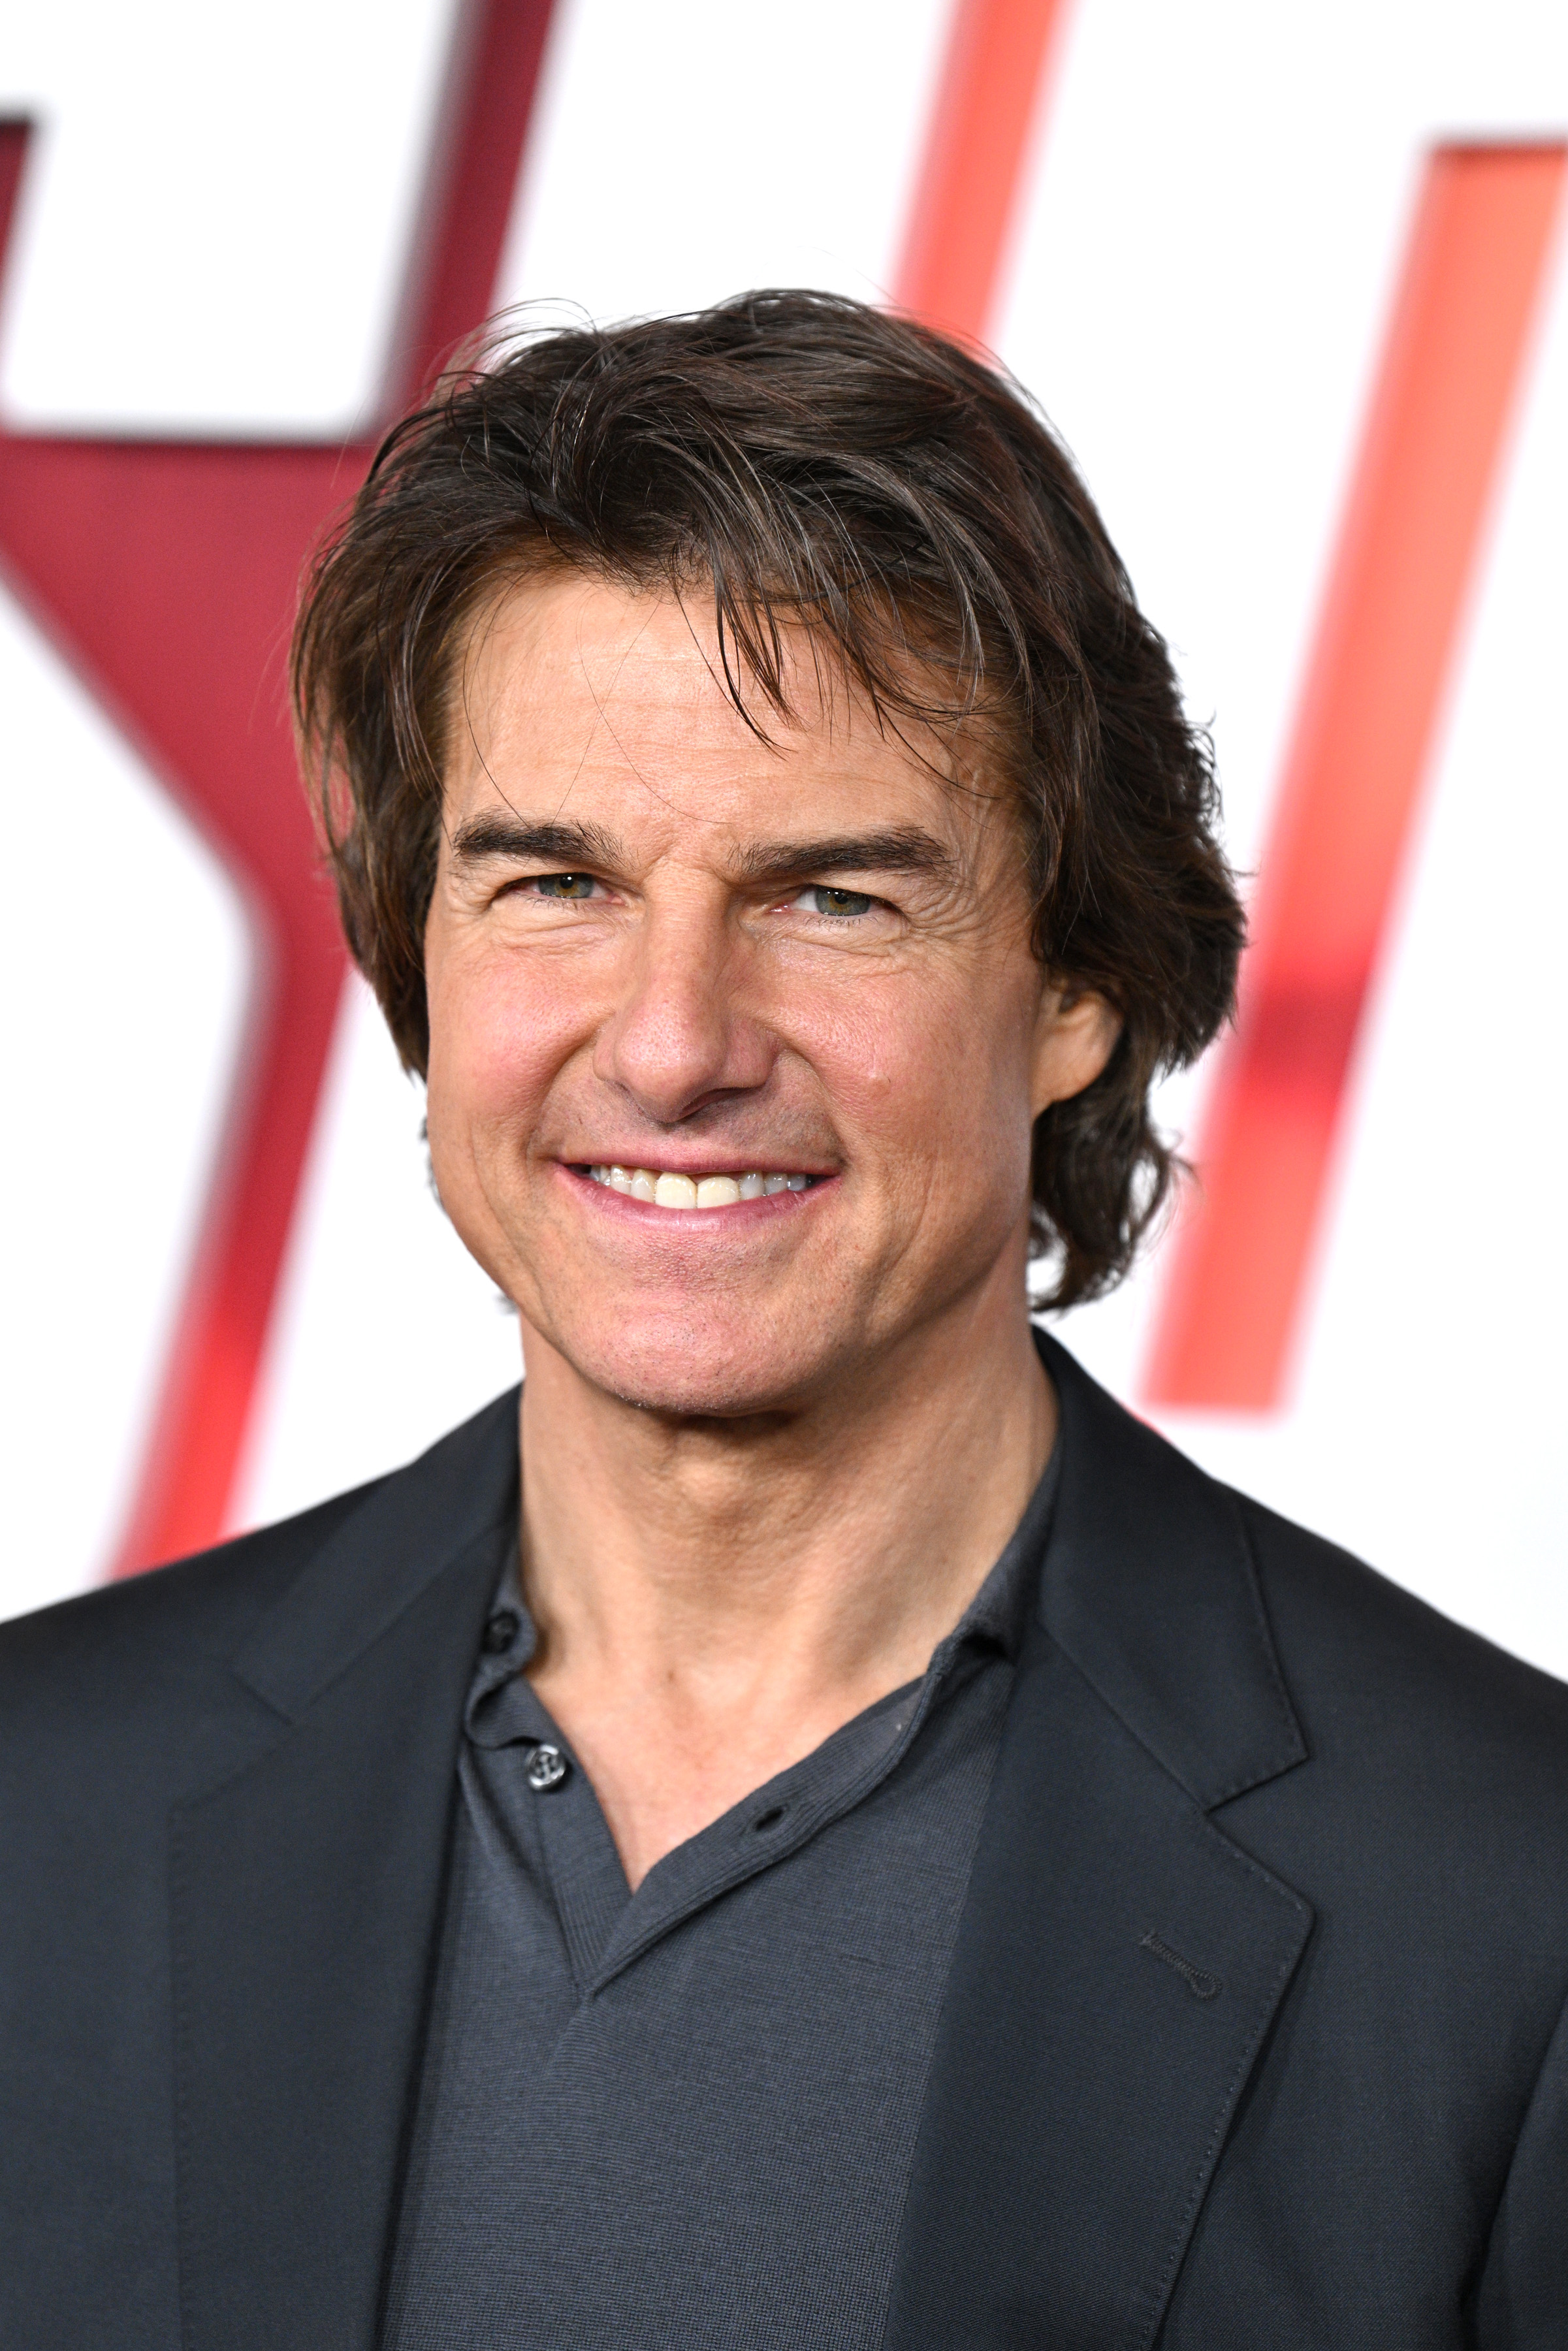 Tom Cruise attends the US Premiere of "Mission: Impossible - Dead Reckoning Part One" on July 10, 2023, in New York, New York | Source: Getty Images